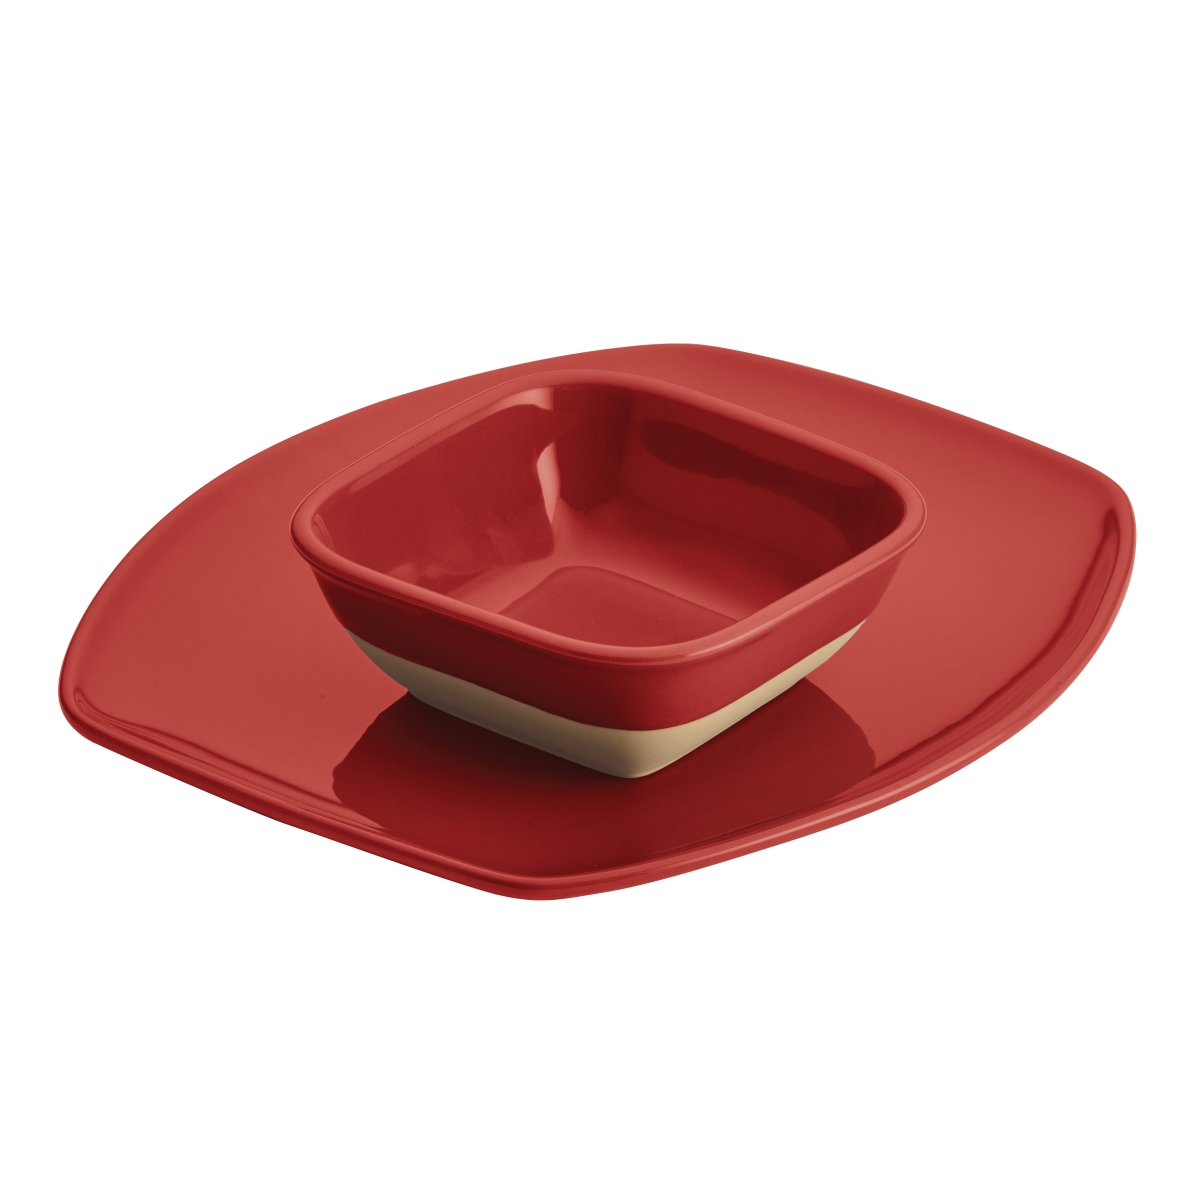 47528 Cityscapes Ceramic Hot Chip & Dip Set, Cherry Red